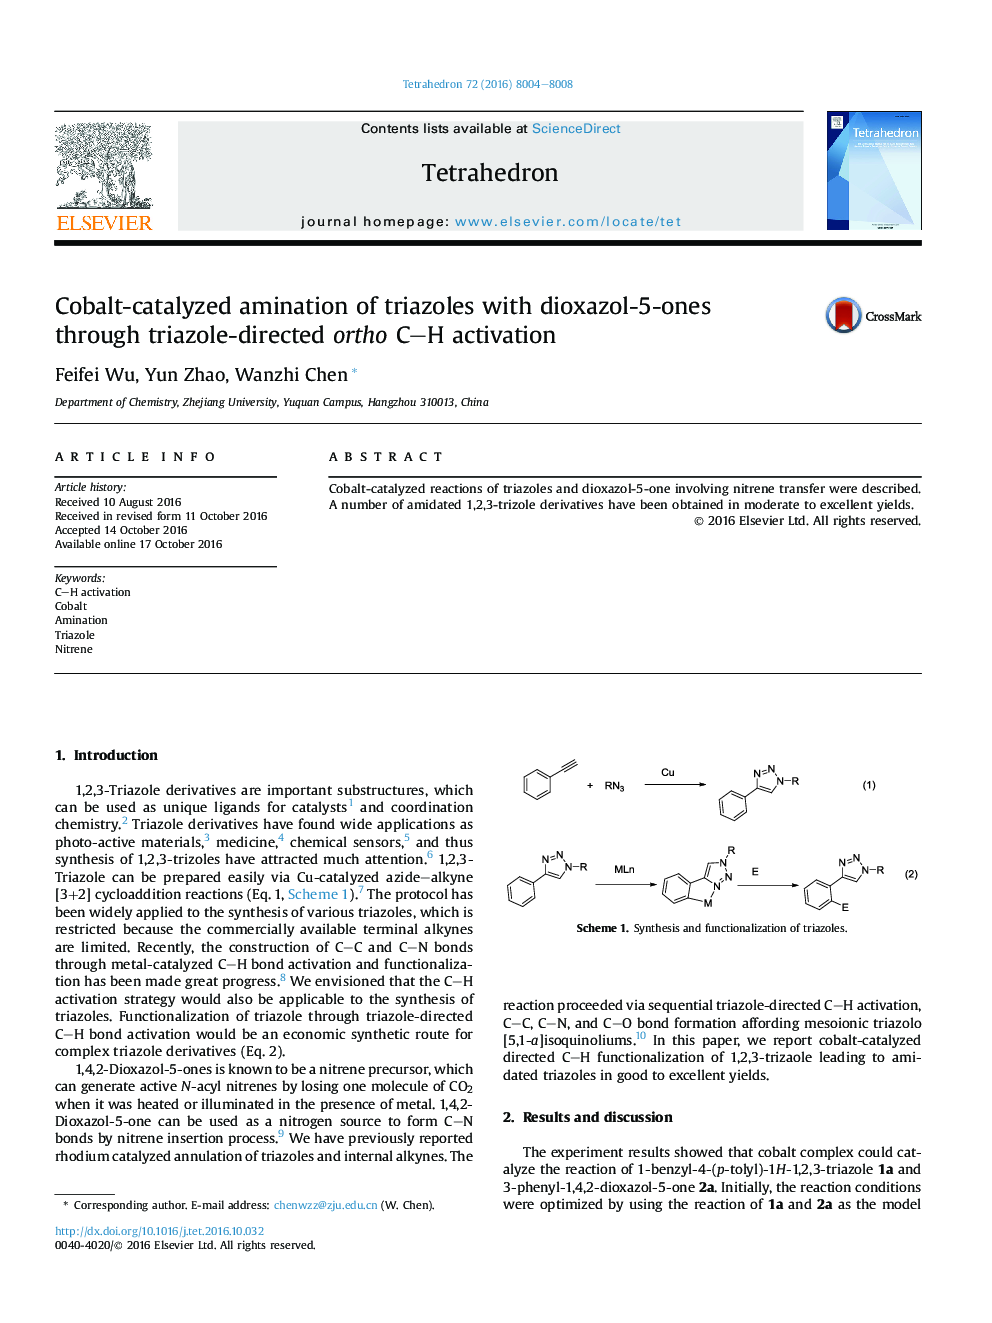 Cobalt-catalyzed amination of triazoles with dioxazol-5-ones through triazole-directed ortho CH activation